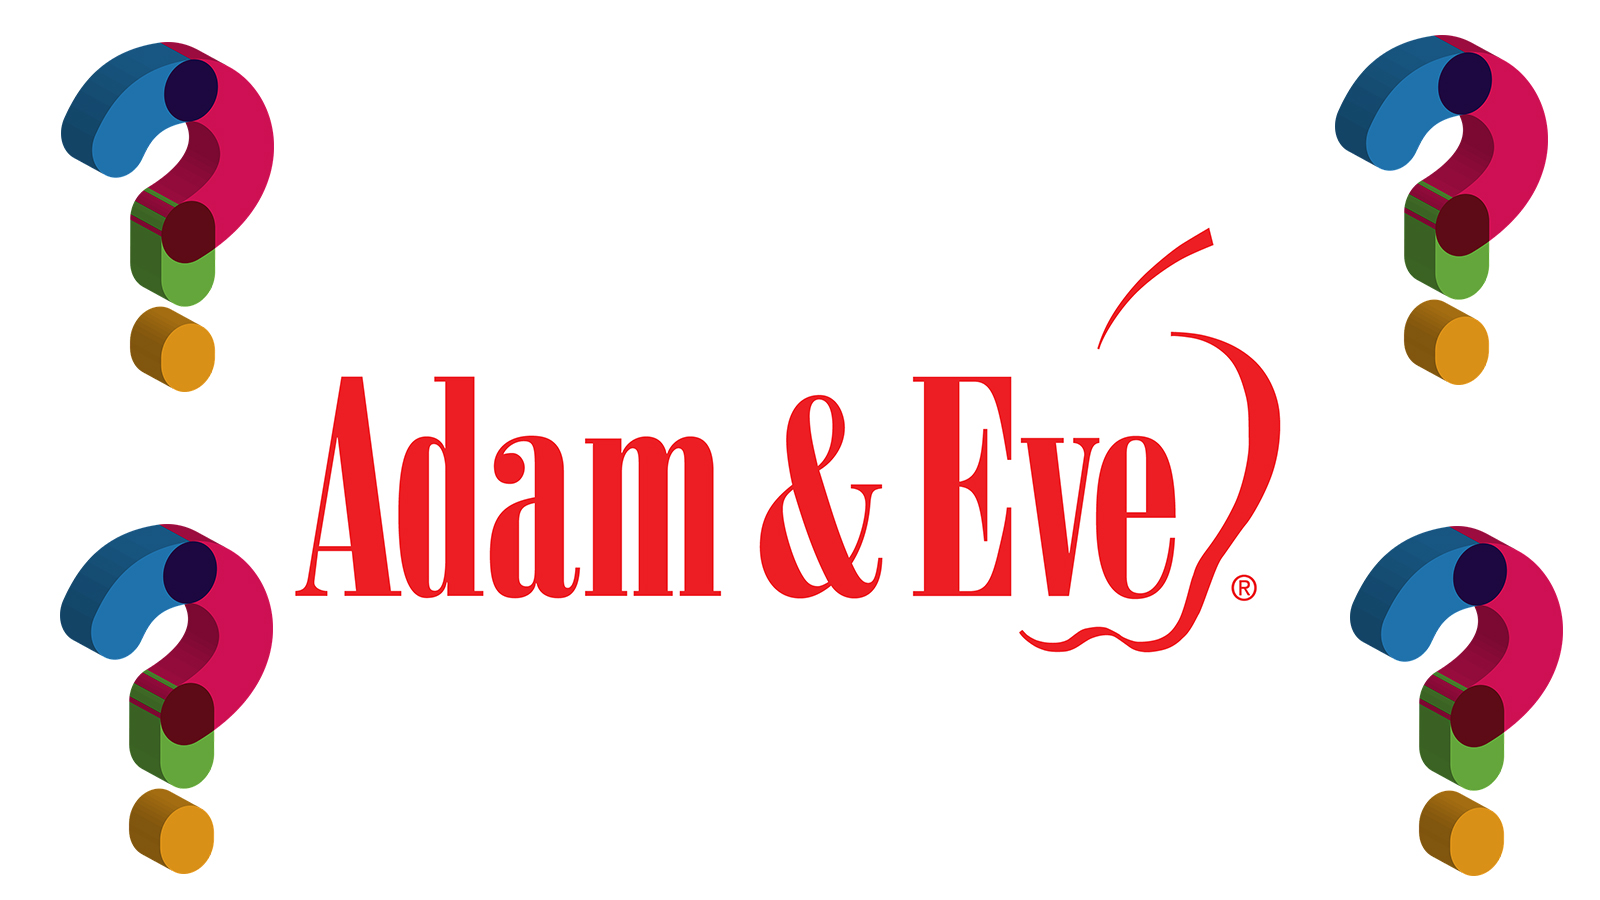 Avn Media Network On Twitter Adam Eve Asks Do You Prefer Sex With